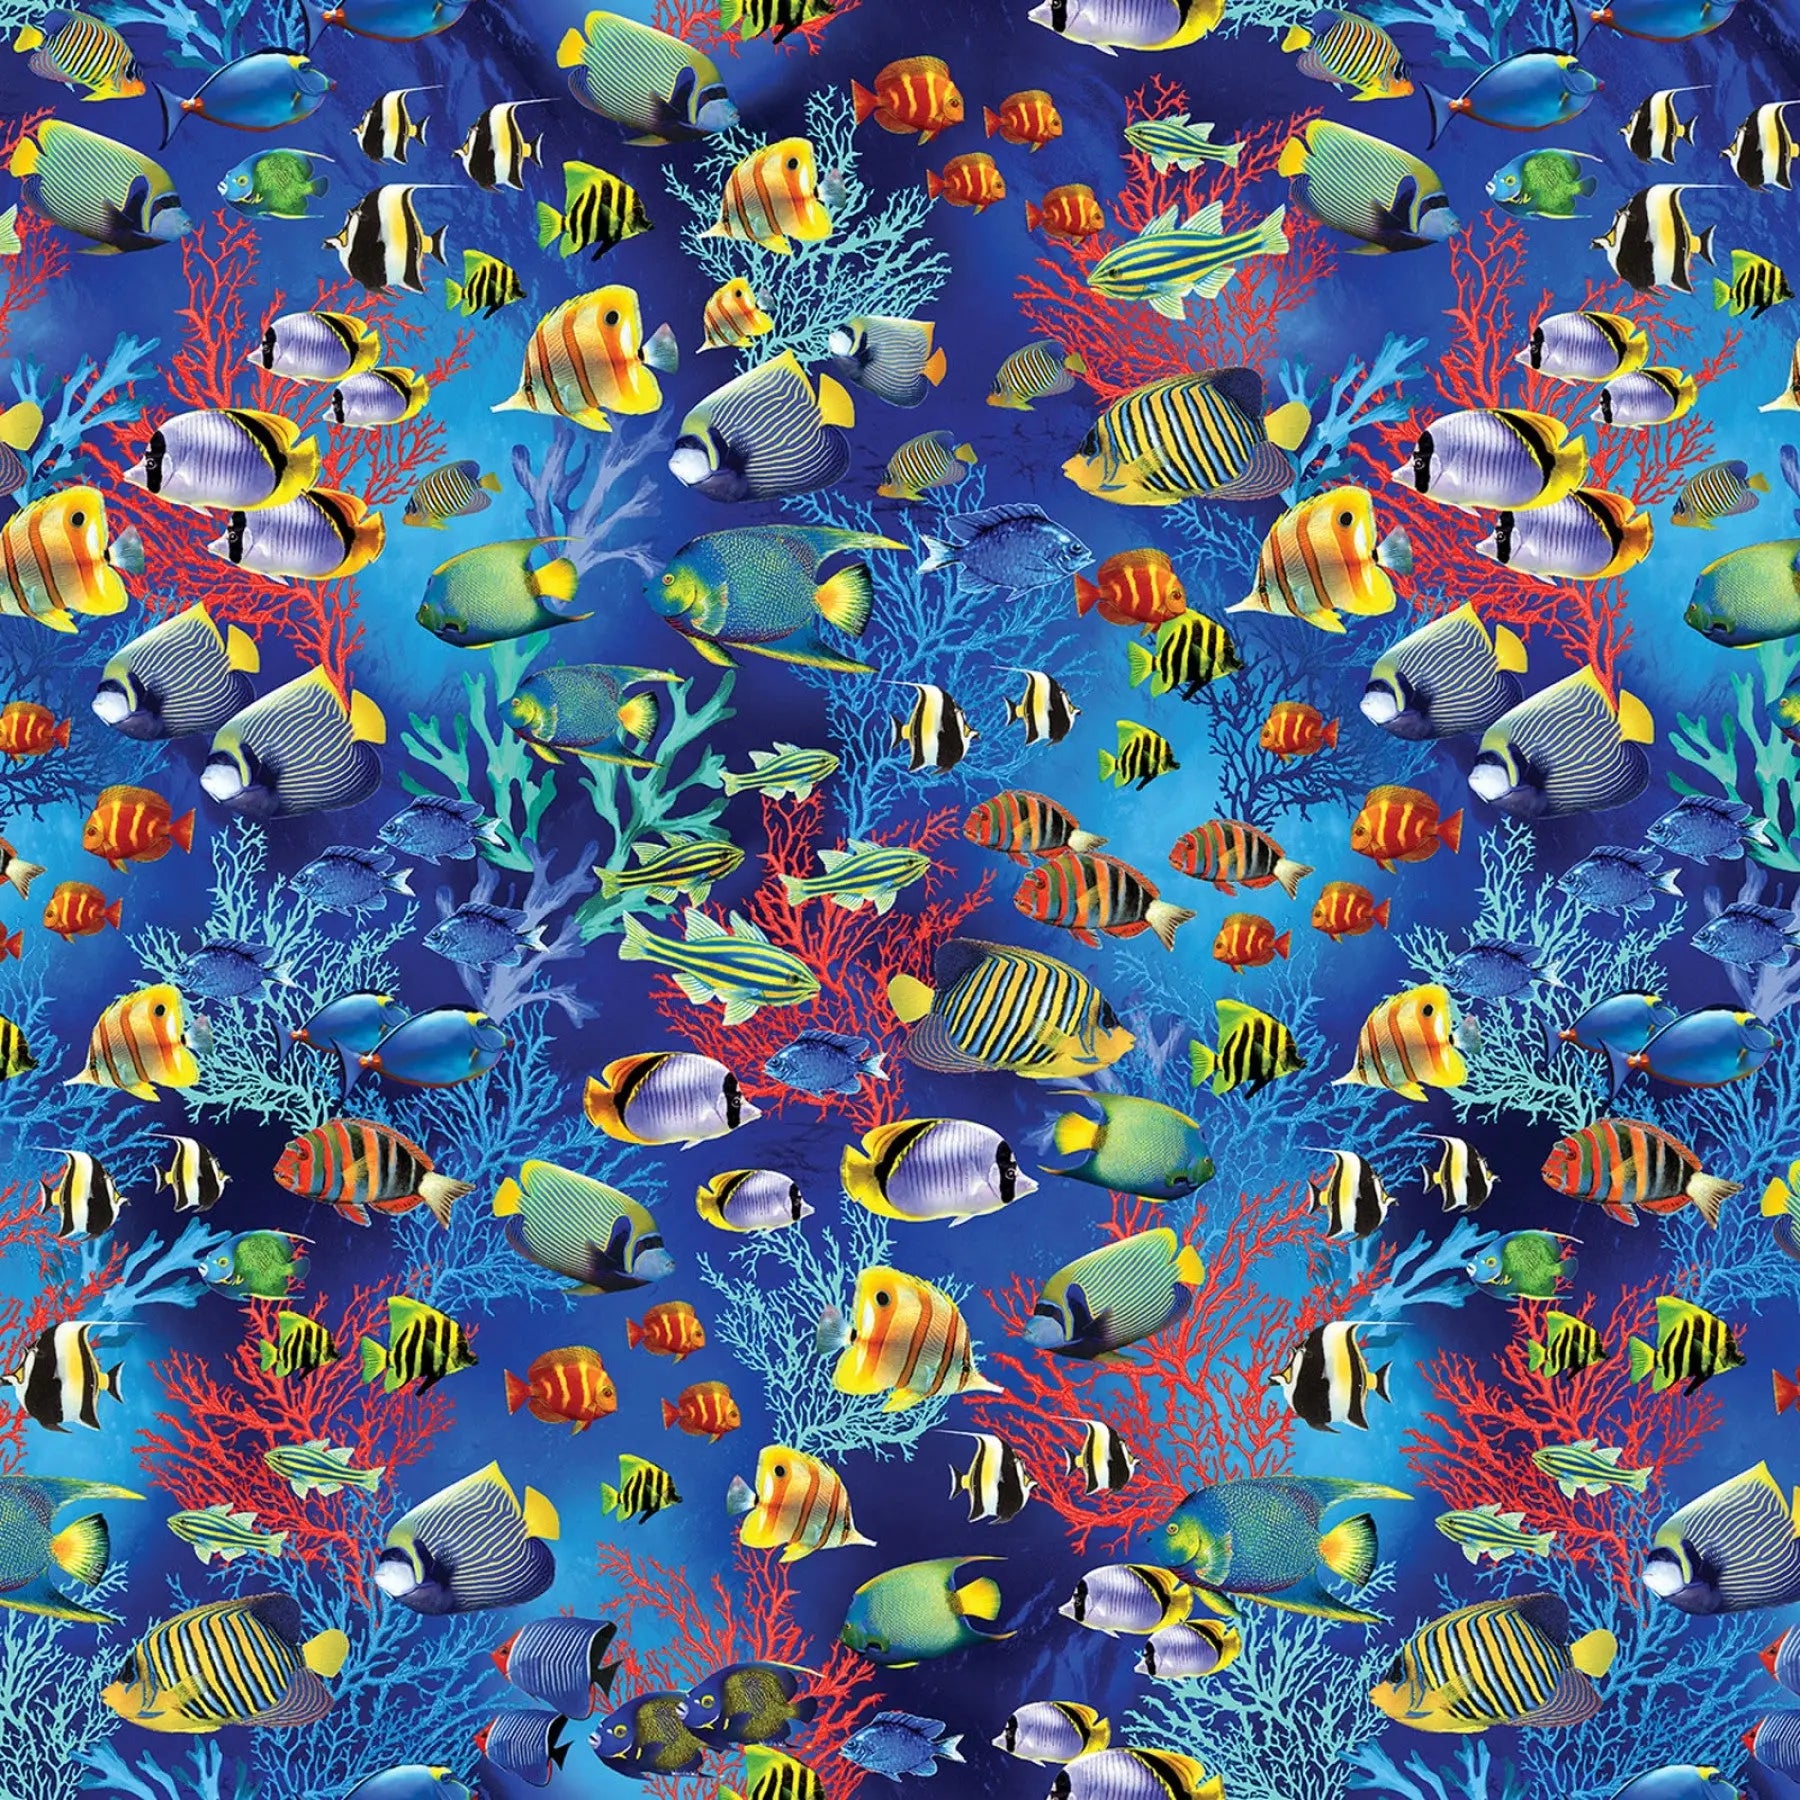 Fish swimming in the ocean wide back fabric.